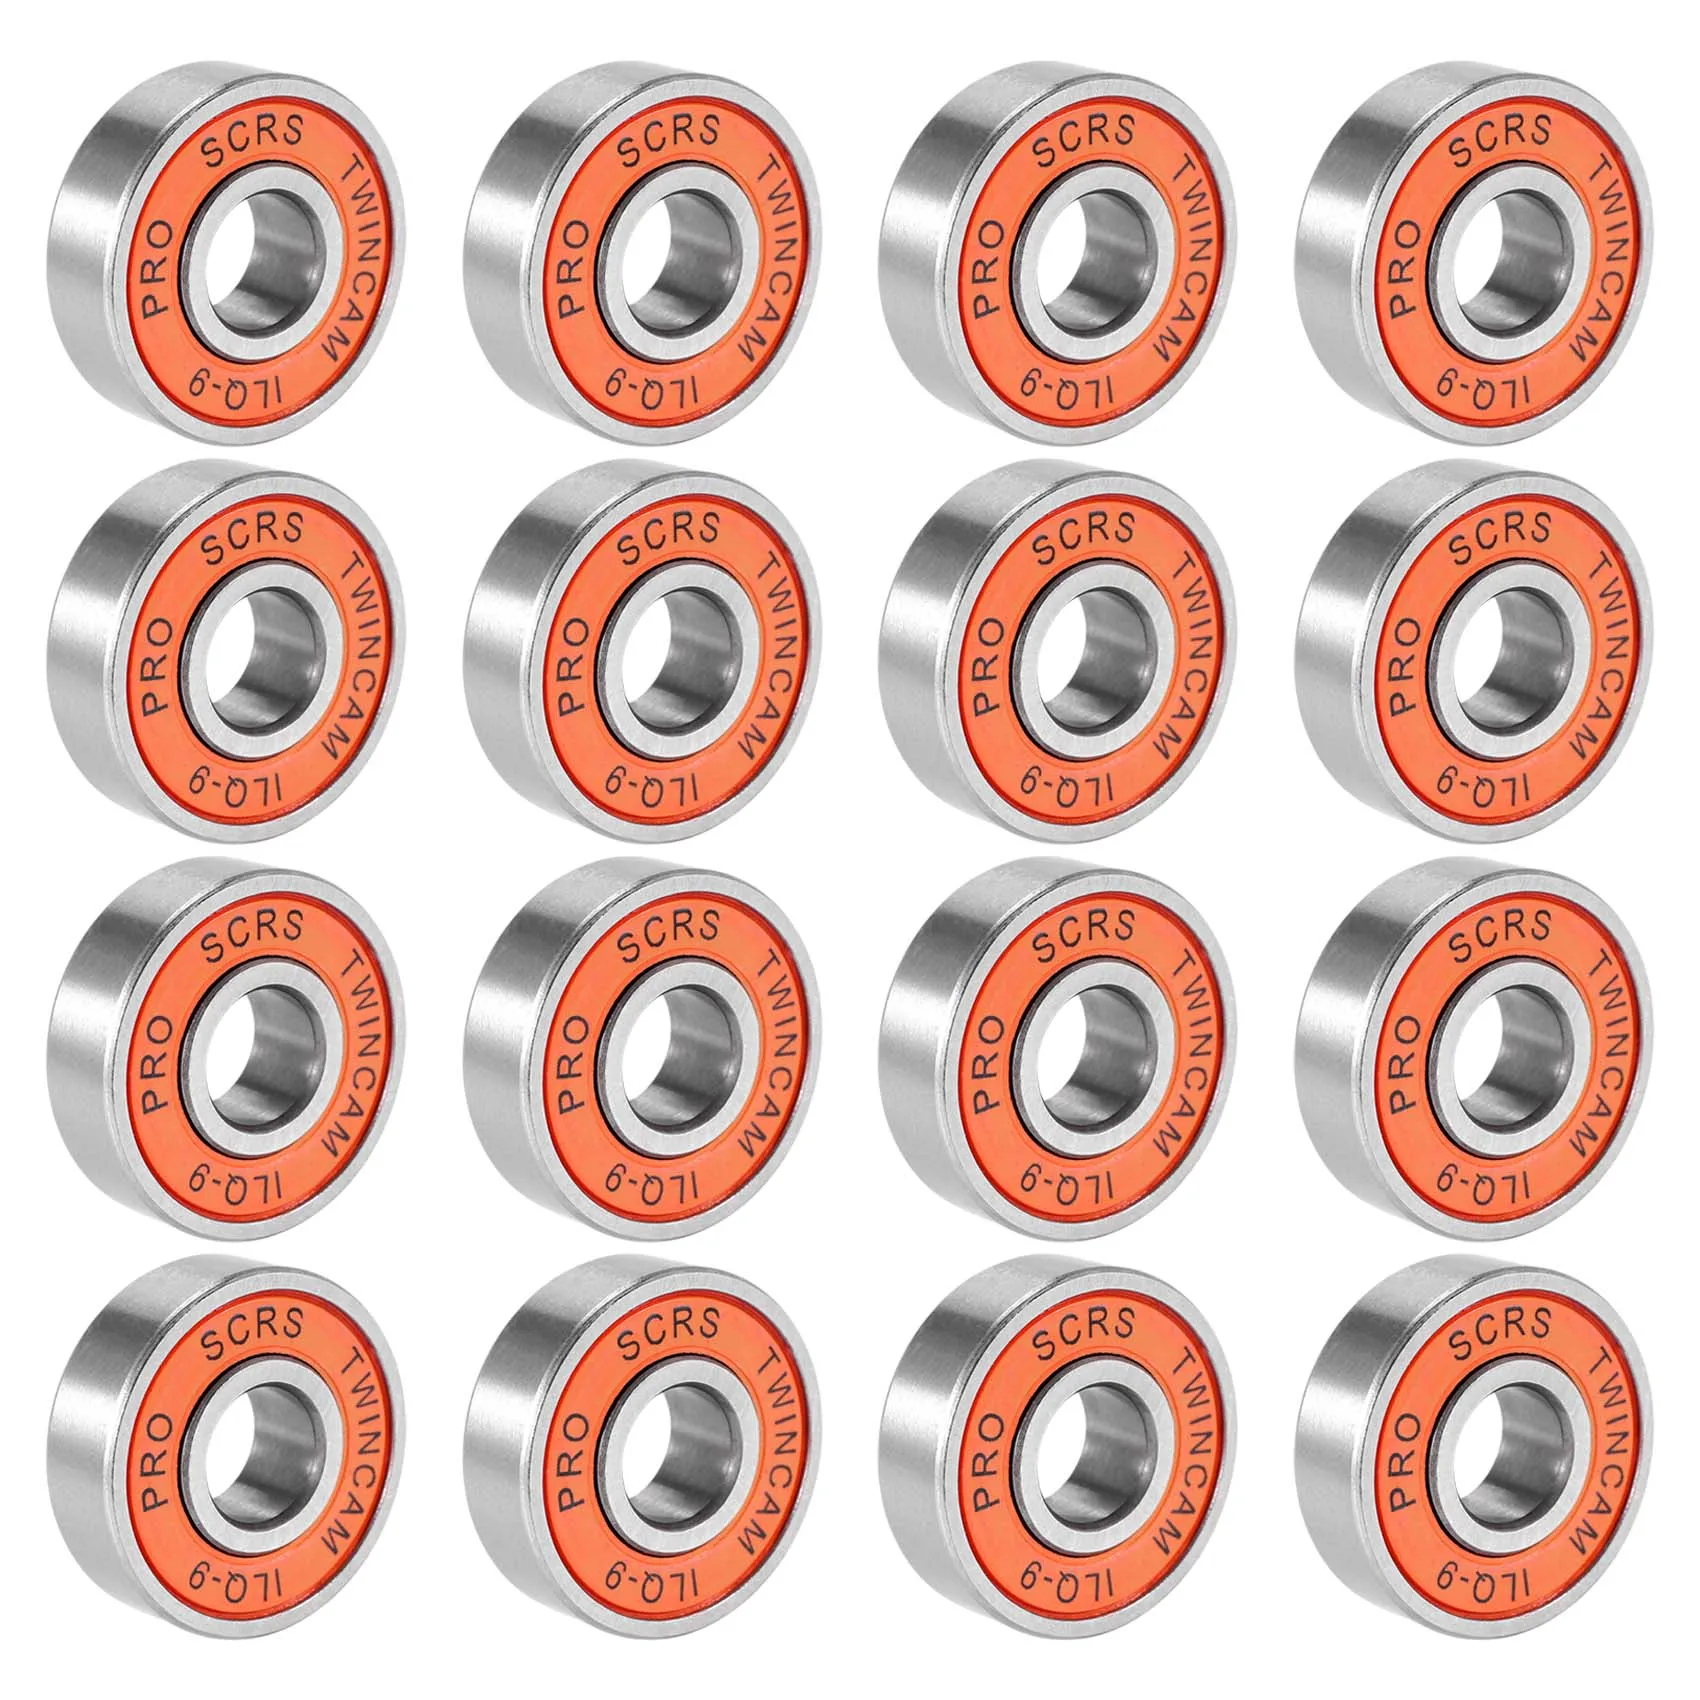 

16Pcs/Lot SKATING TWINCAM ILQ-9 608Zz Miniature Ball Radial Ball Bearings for Skate Board Shoes Accessories